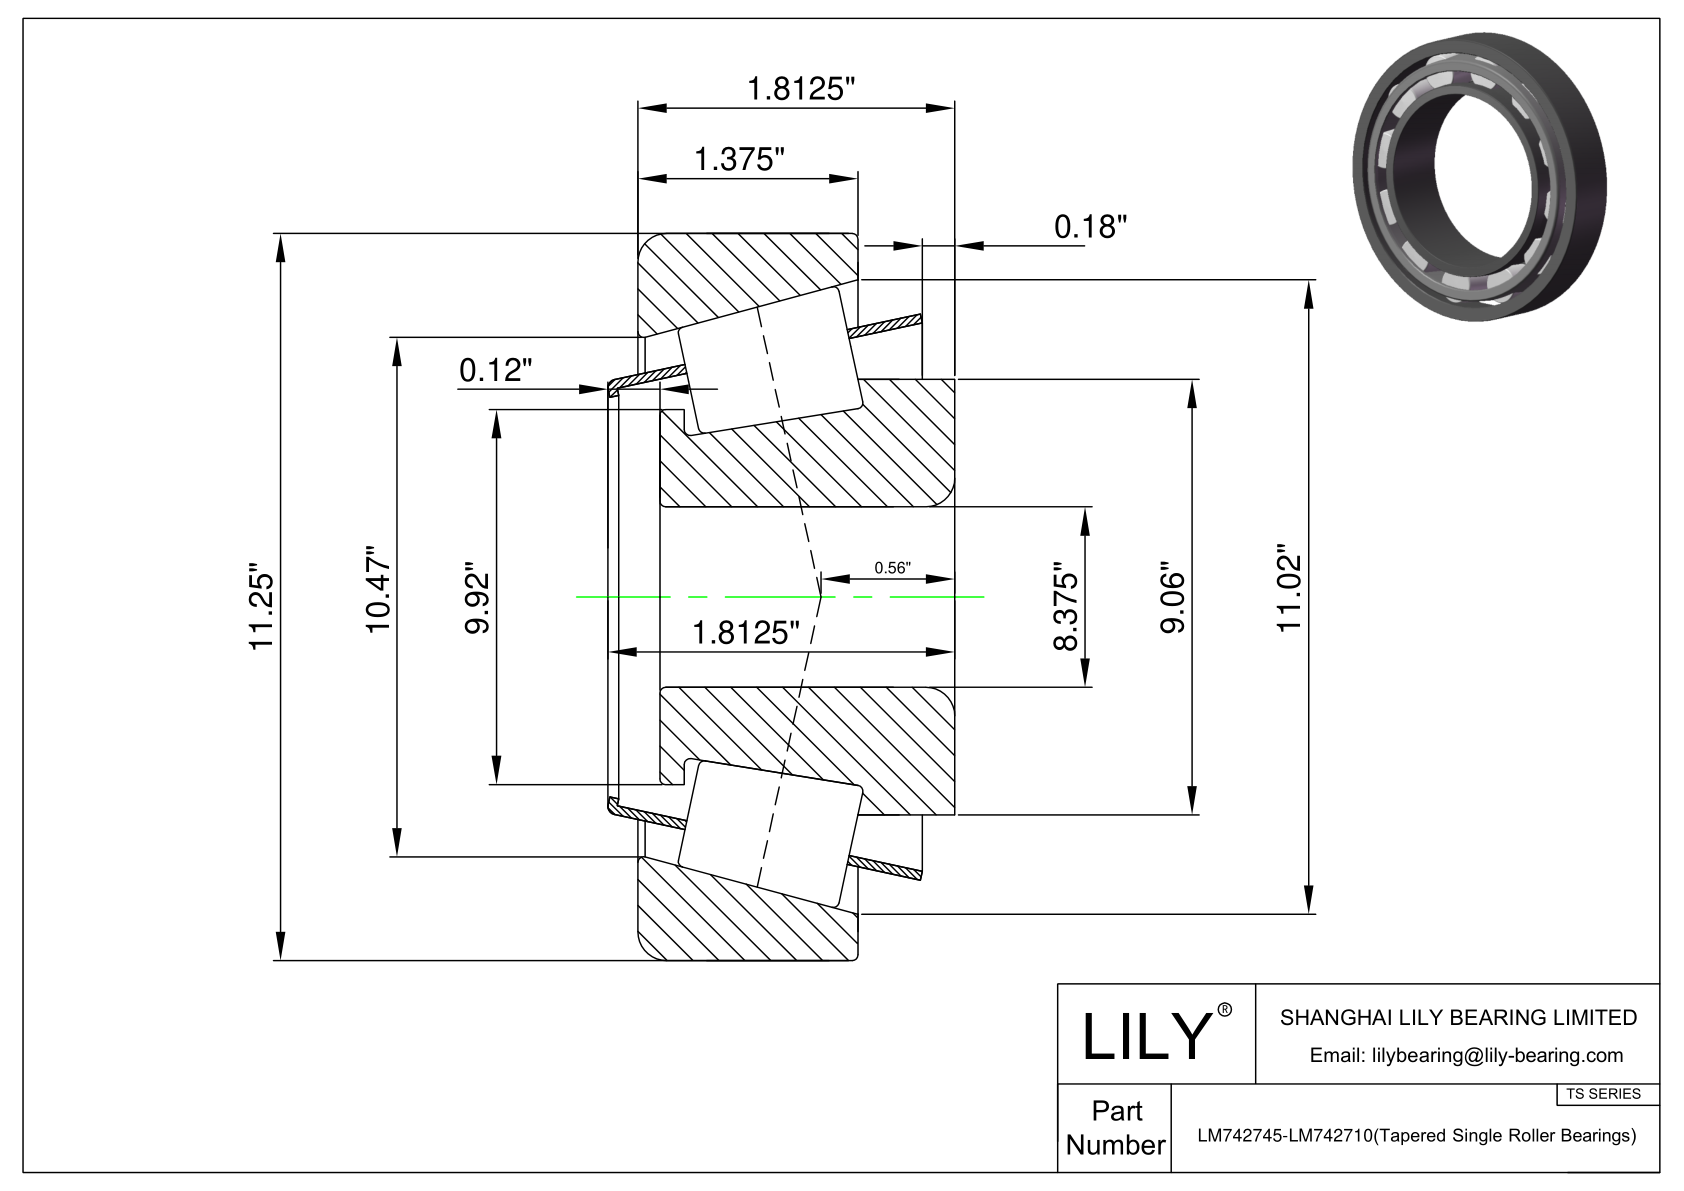 LM742745-LM742710 TS (Tapered Single Roller Bearings) (Imperial) cad drawing